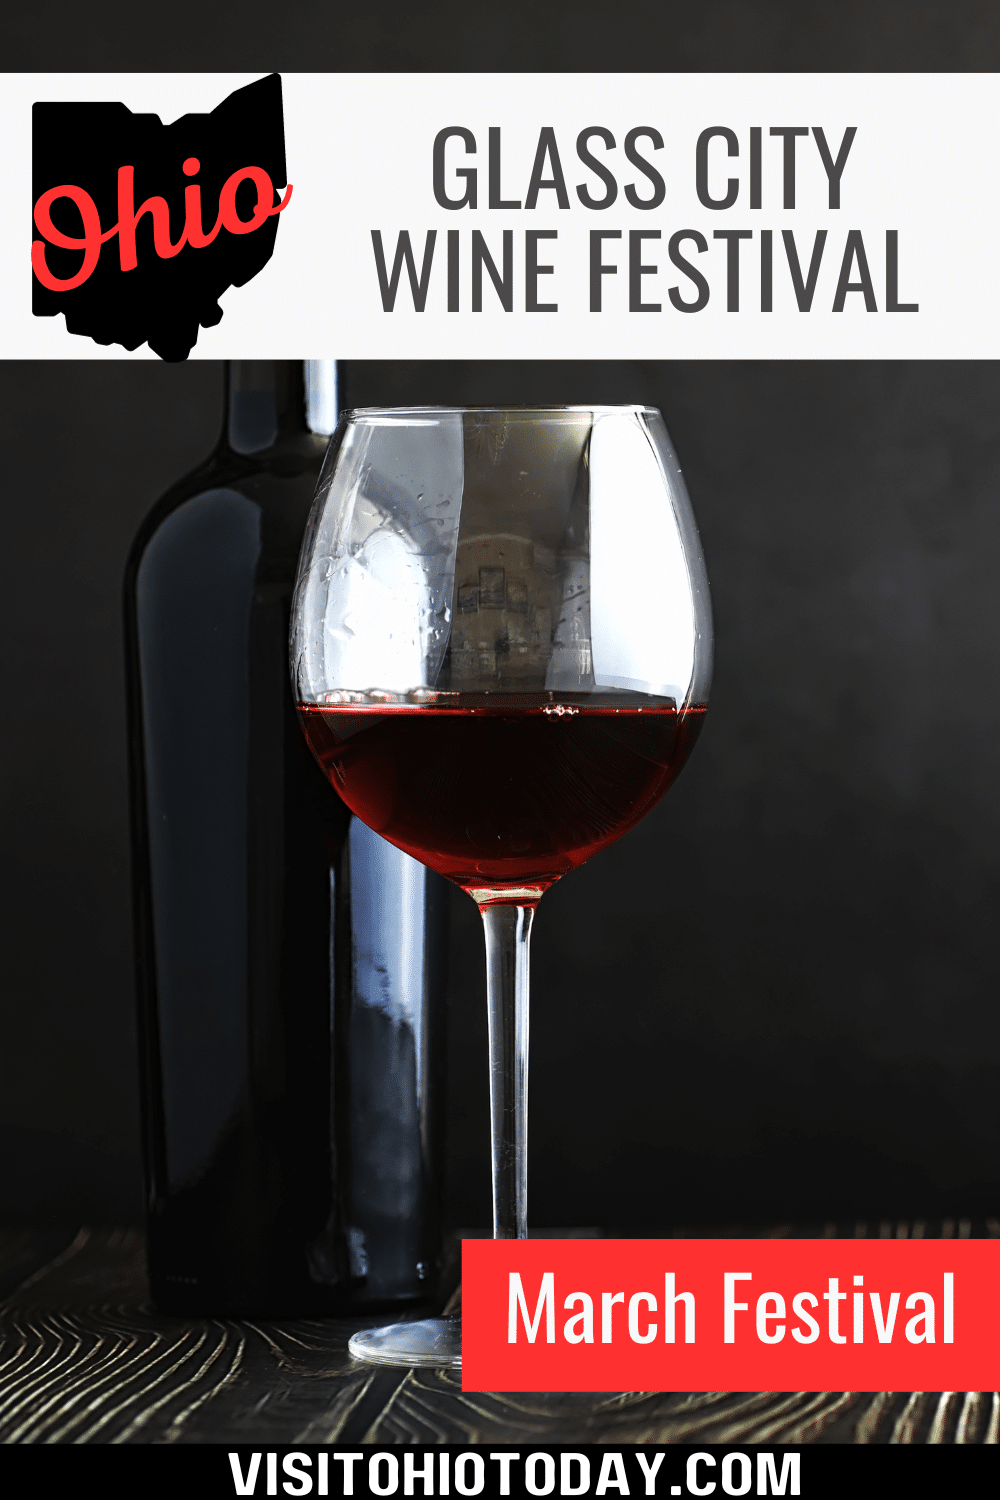 Glass City Wine Festival is a wine, food, and shopping event that will take place in early March at the Glass City Center in Toledo.